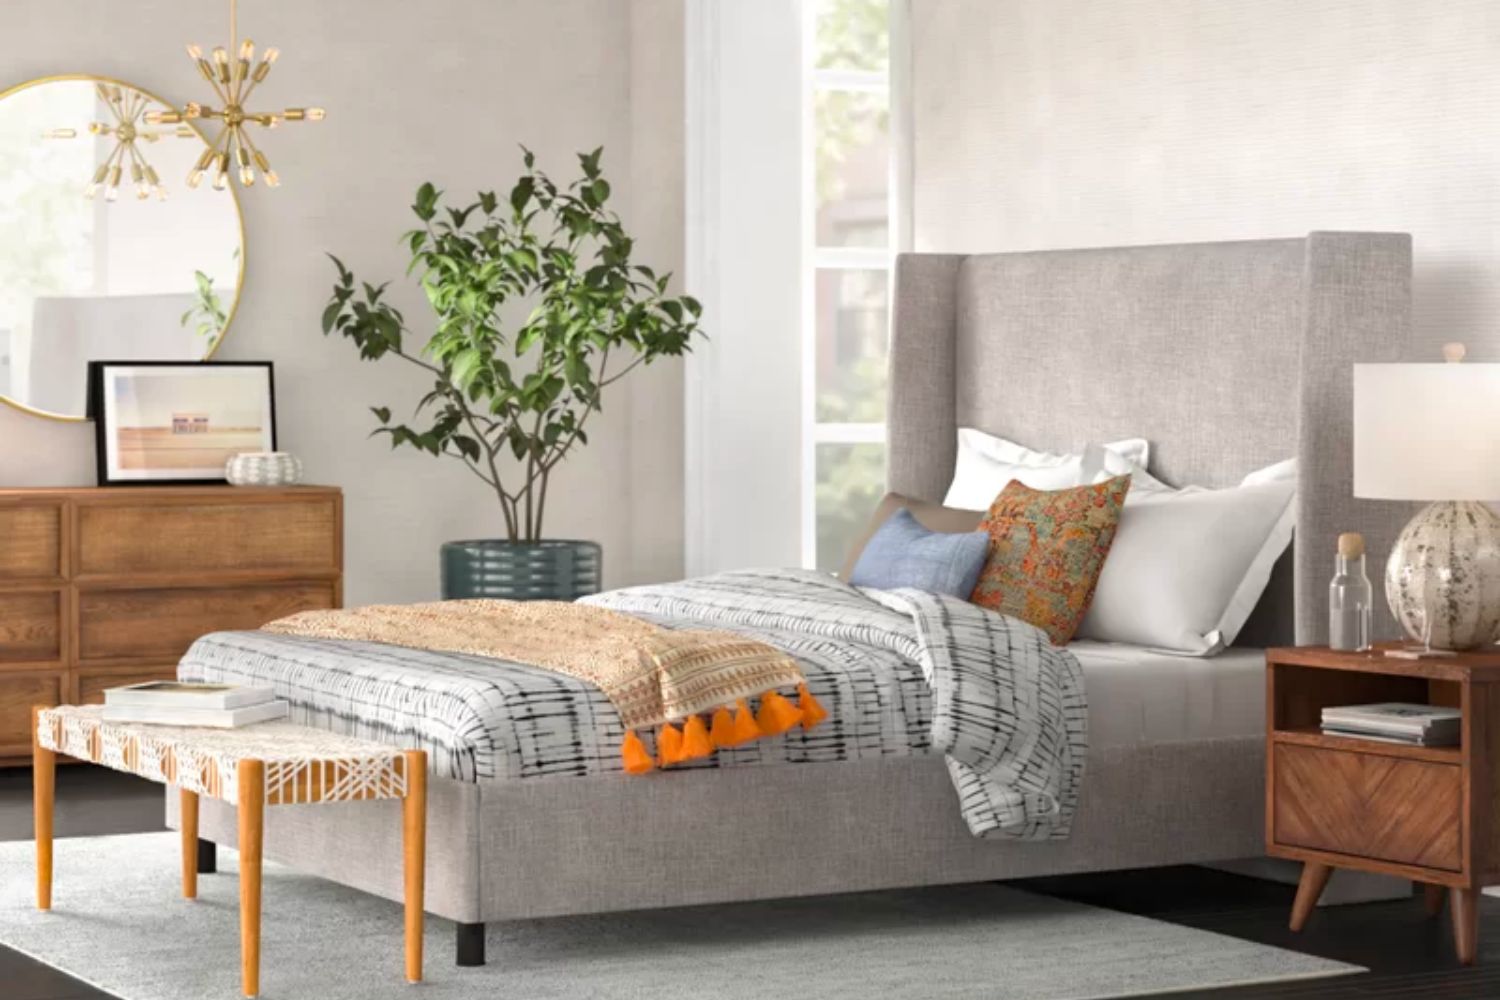 Deals Roundup Cyber Monday Furniture 11/29: Joss & Main Holst Upholstered Low Profile Standard Bed